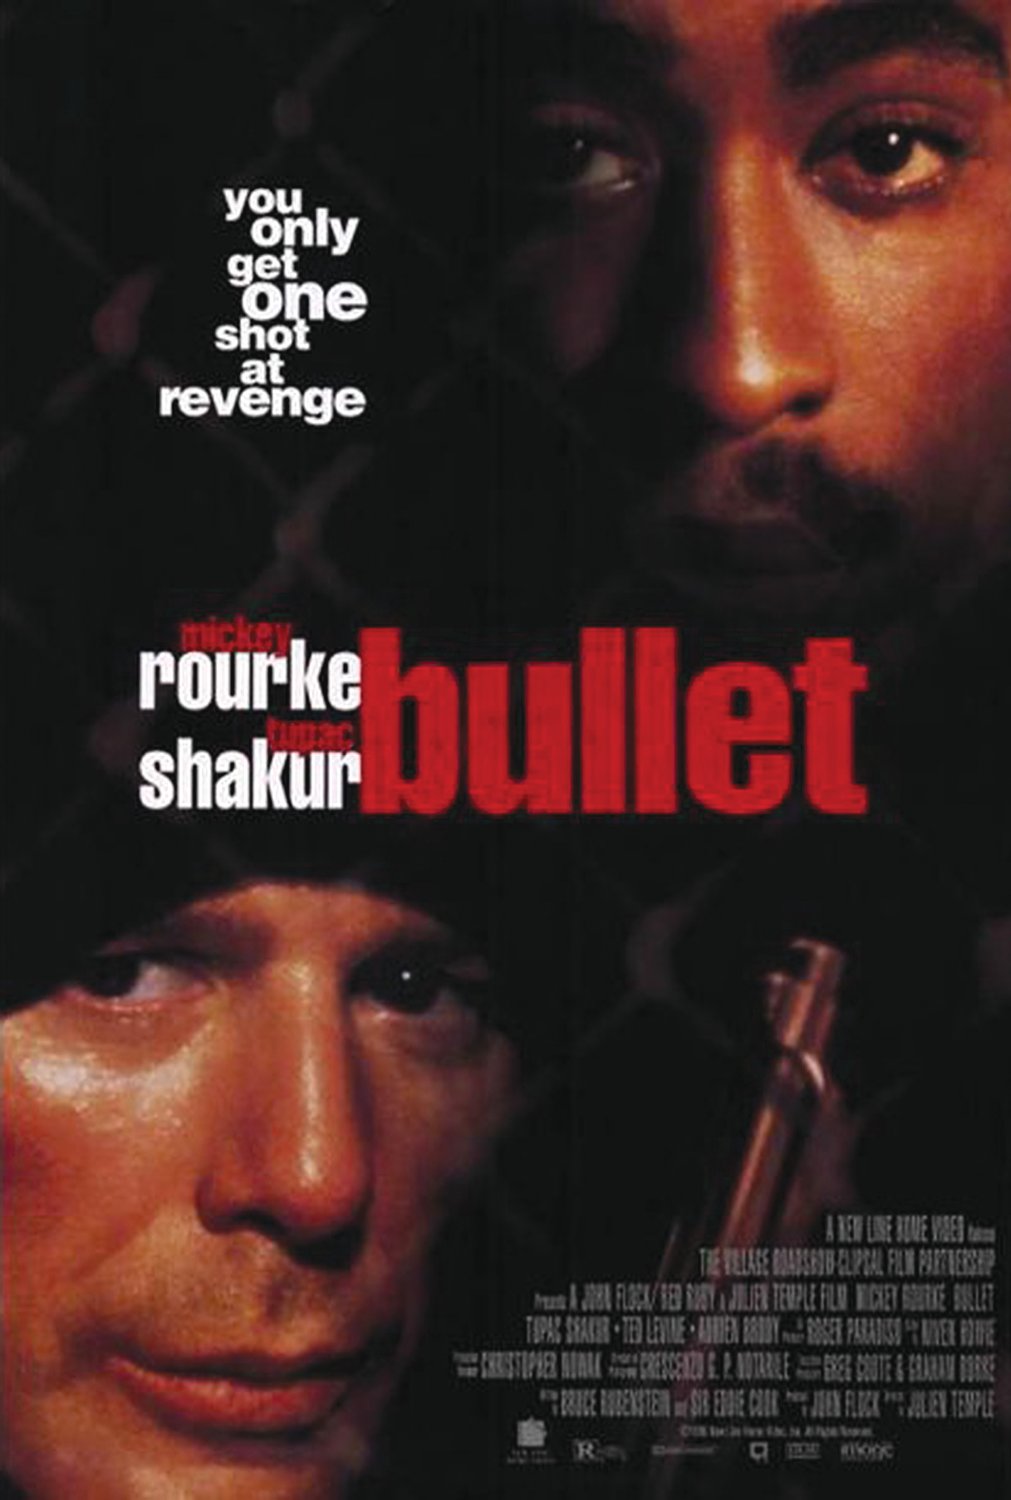 “Bullet” (1996) stars Mickey Rourke and Tupac Shakur as gangland rivals on a tragic collision course.